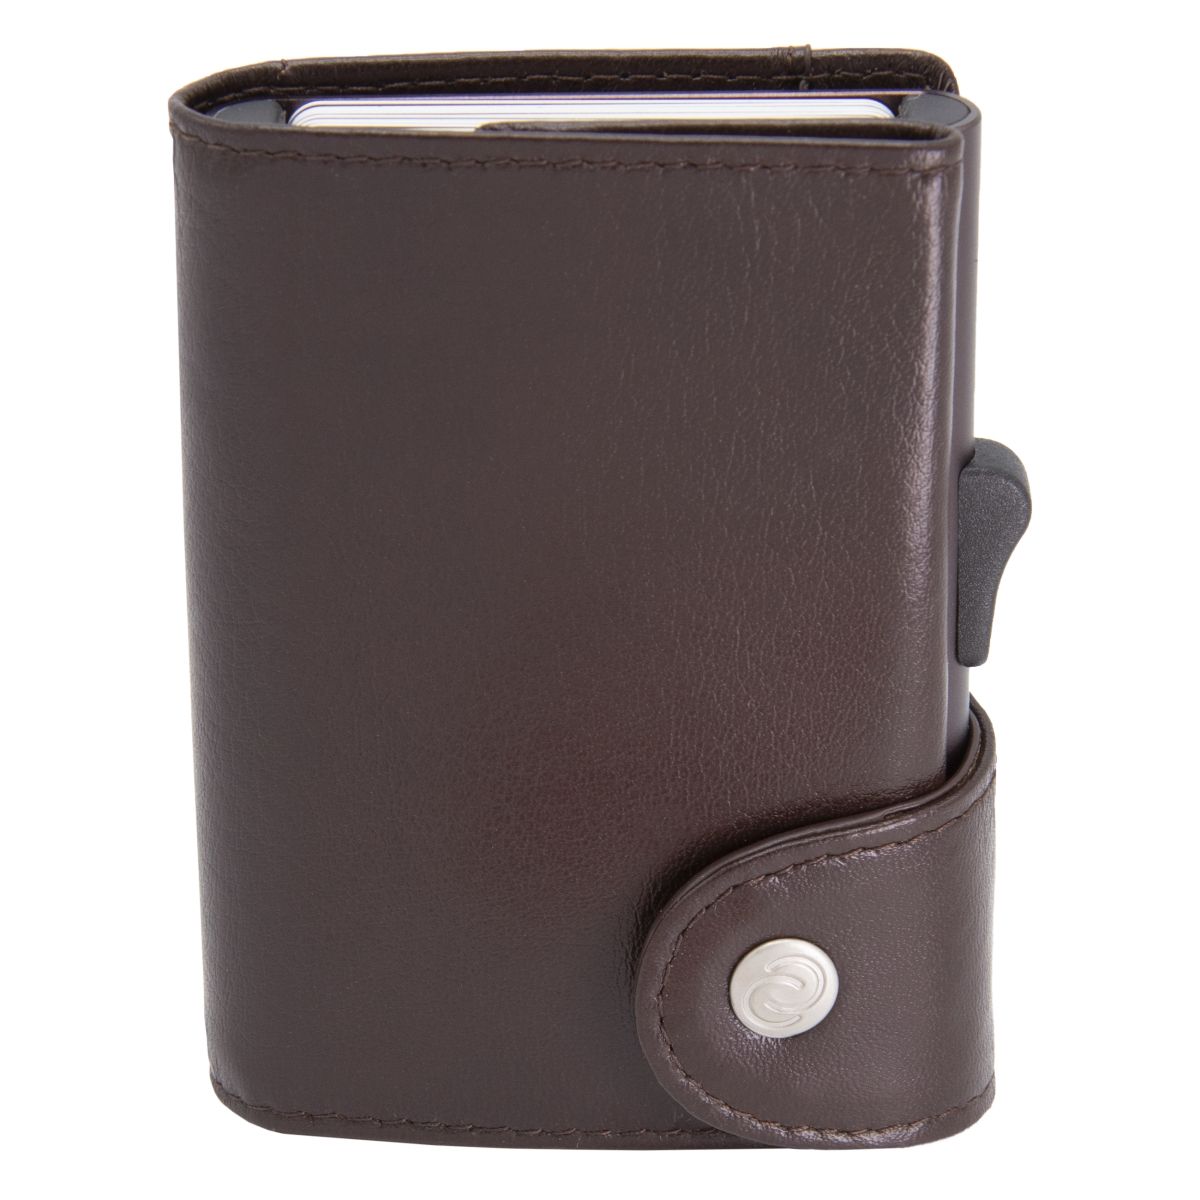 C-Secure XL Aluminum Wallet with Genuine Leather - Mogano Brown